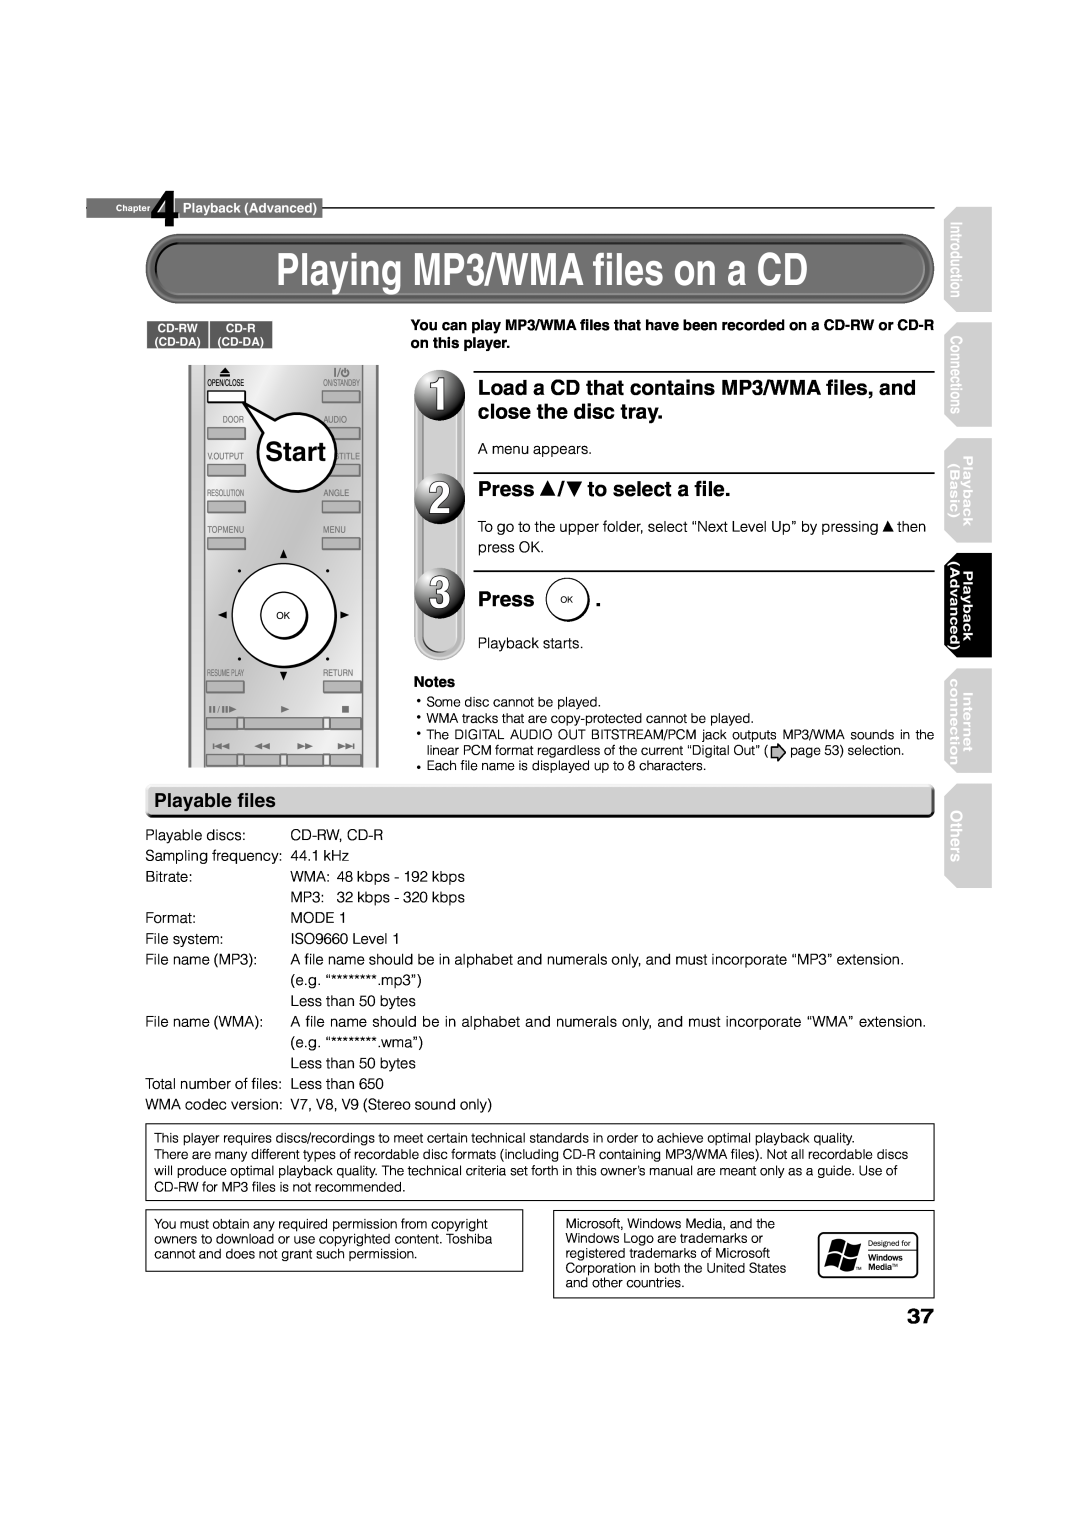 Toshiba HD-A1 Playing MP3/WMA Þles on a CD, Start, Load a CD that contains MP3/WMA Þles, and, close the disc tray, Press 